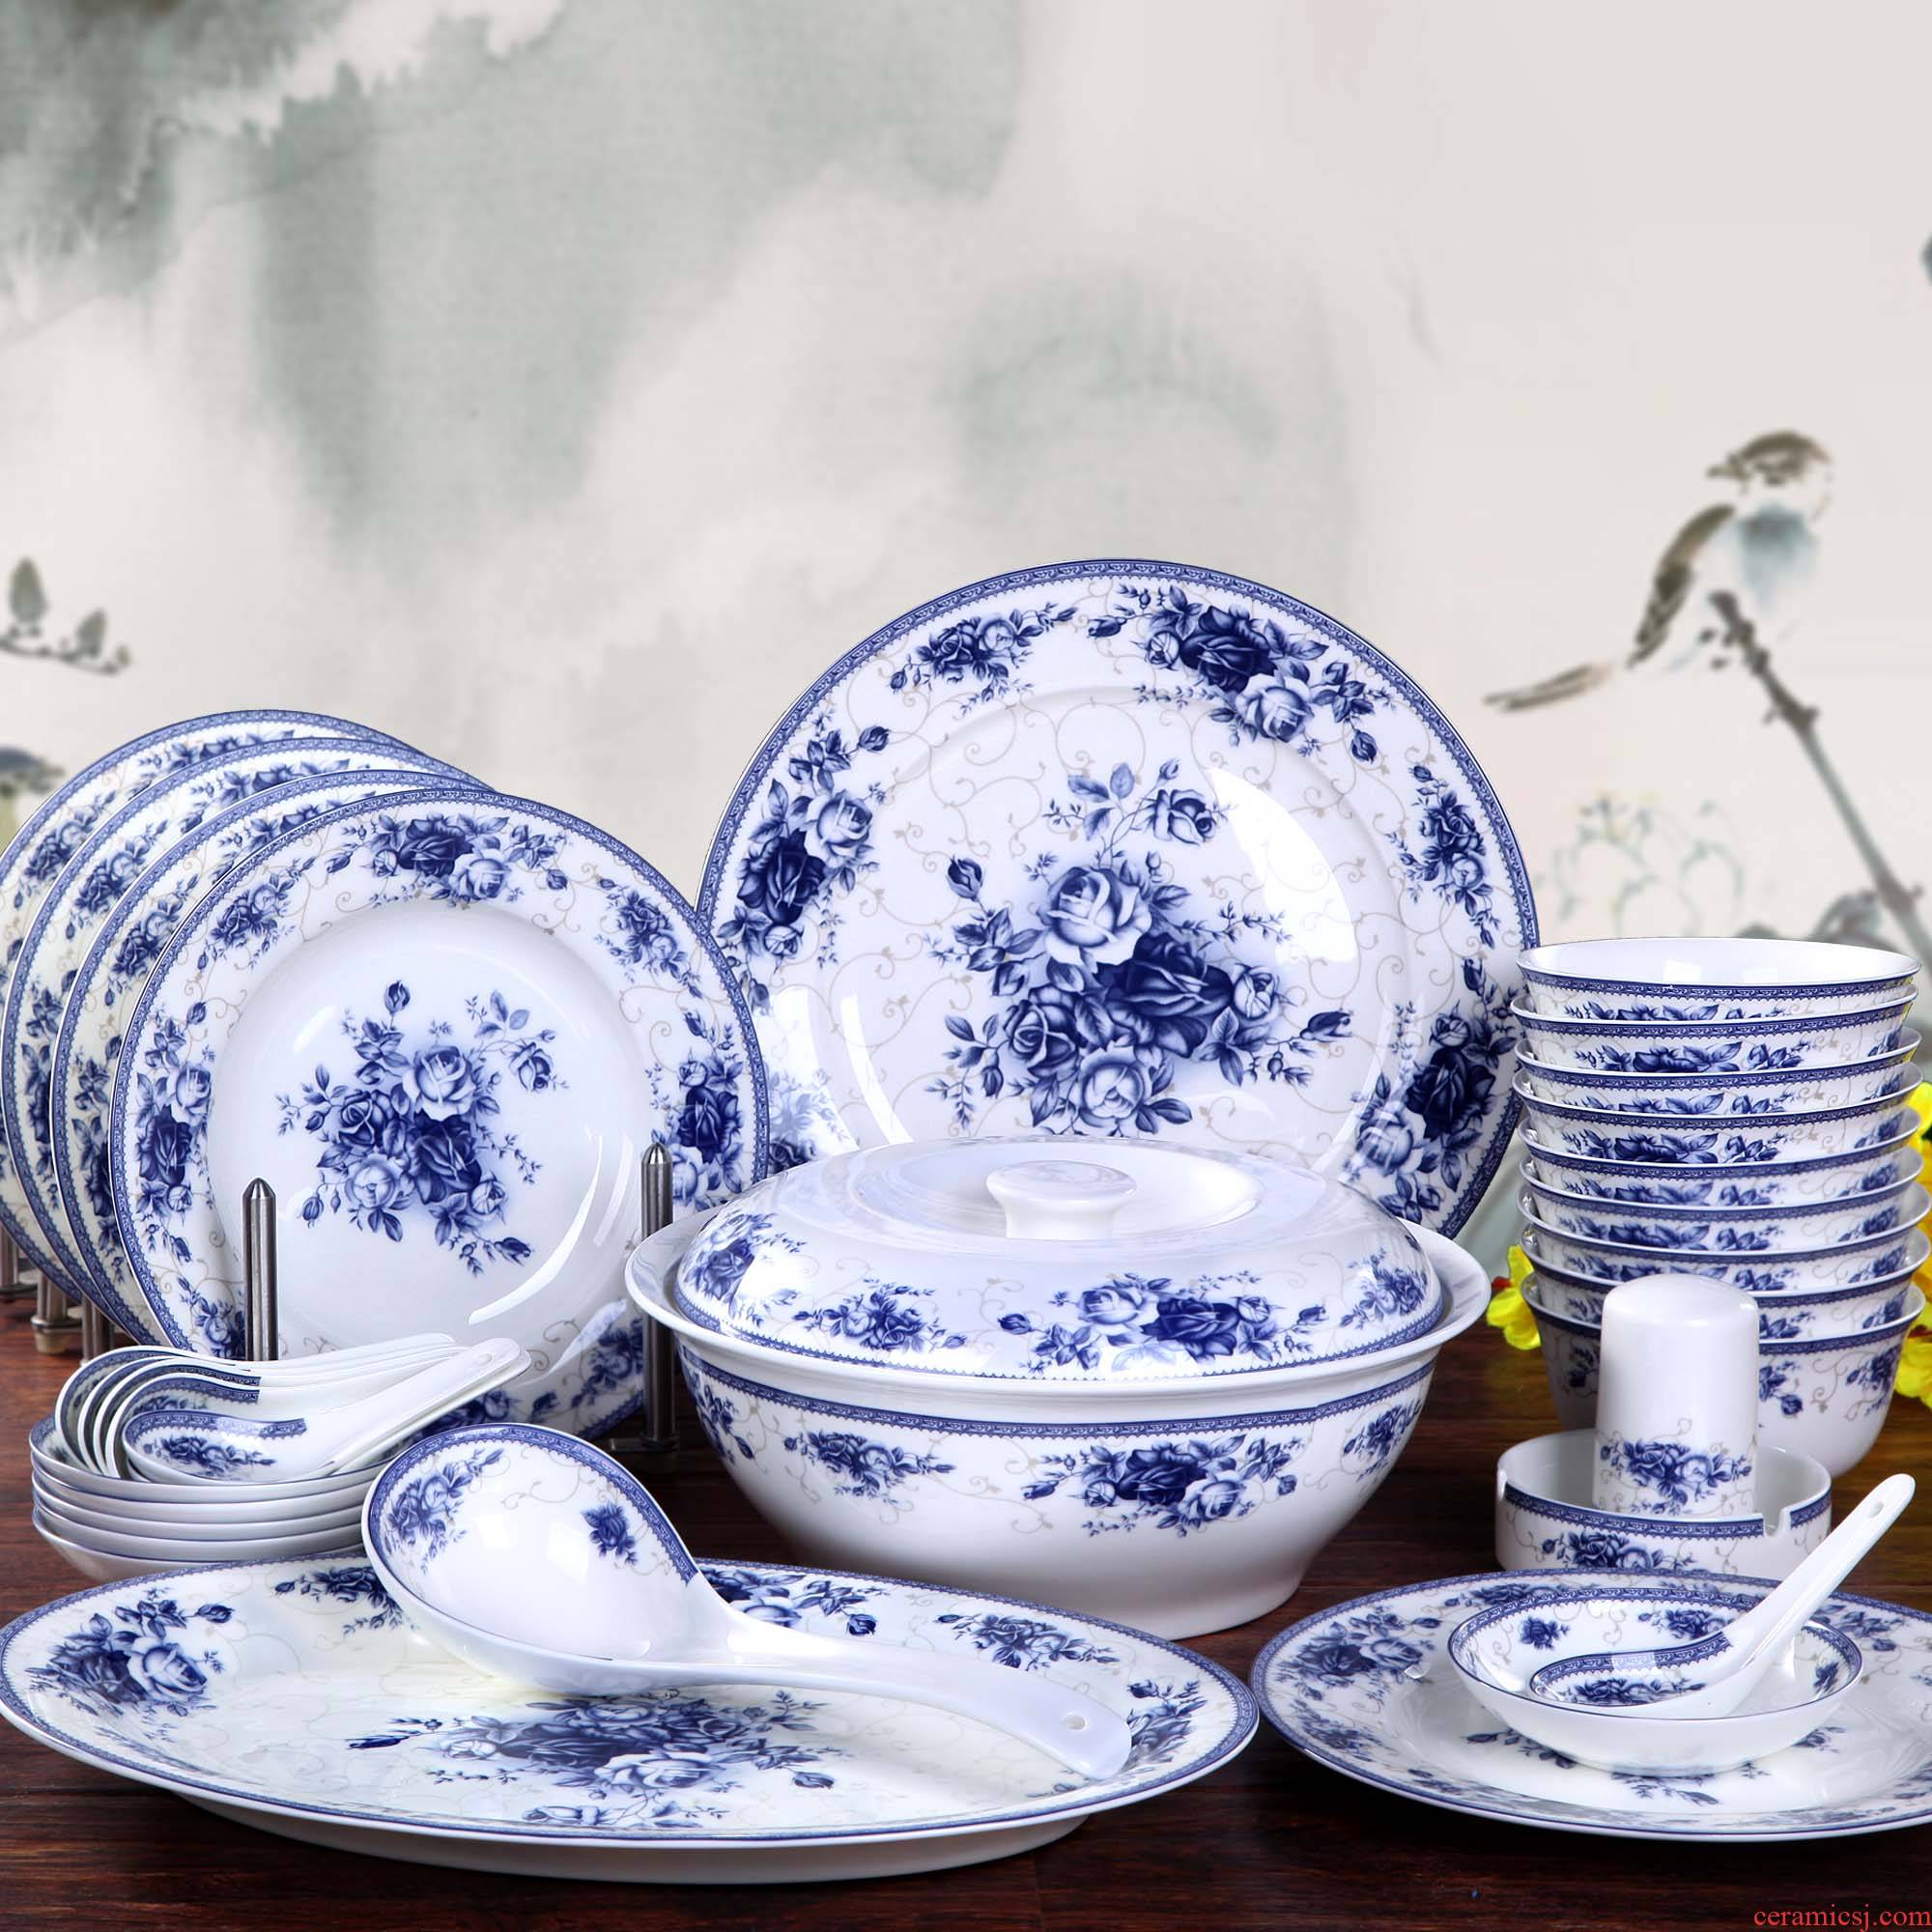 JingDe 28 head glaze ceramic tableware blue and white porcelain bowls sets ipads China wedding housewarming gift package in the mail